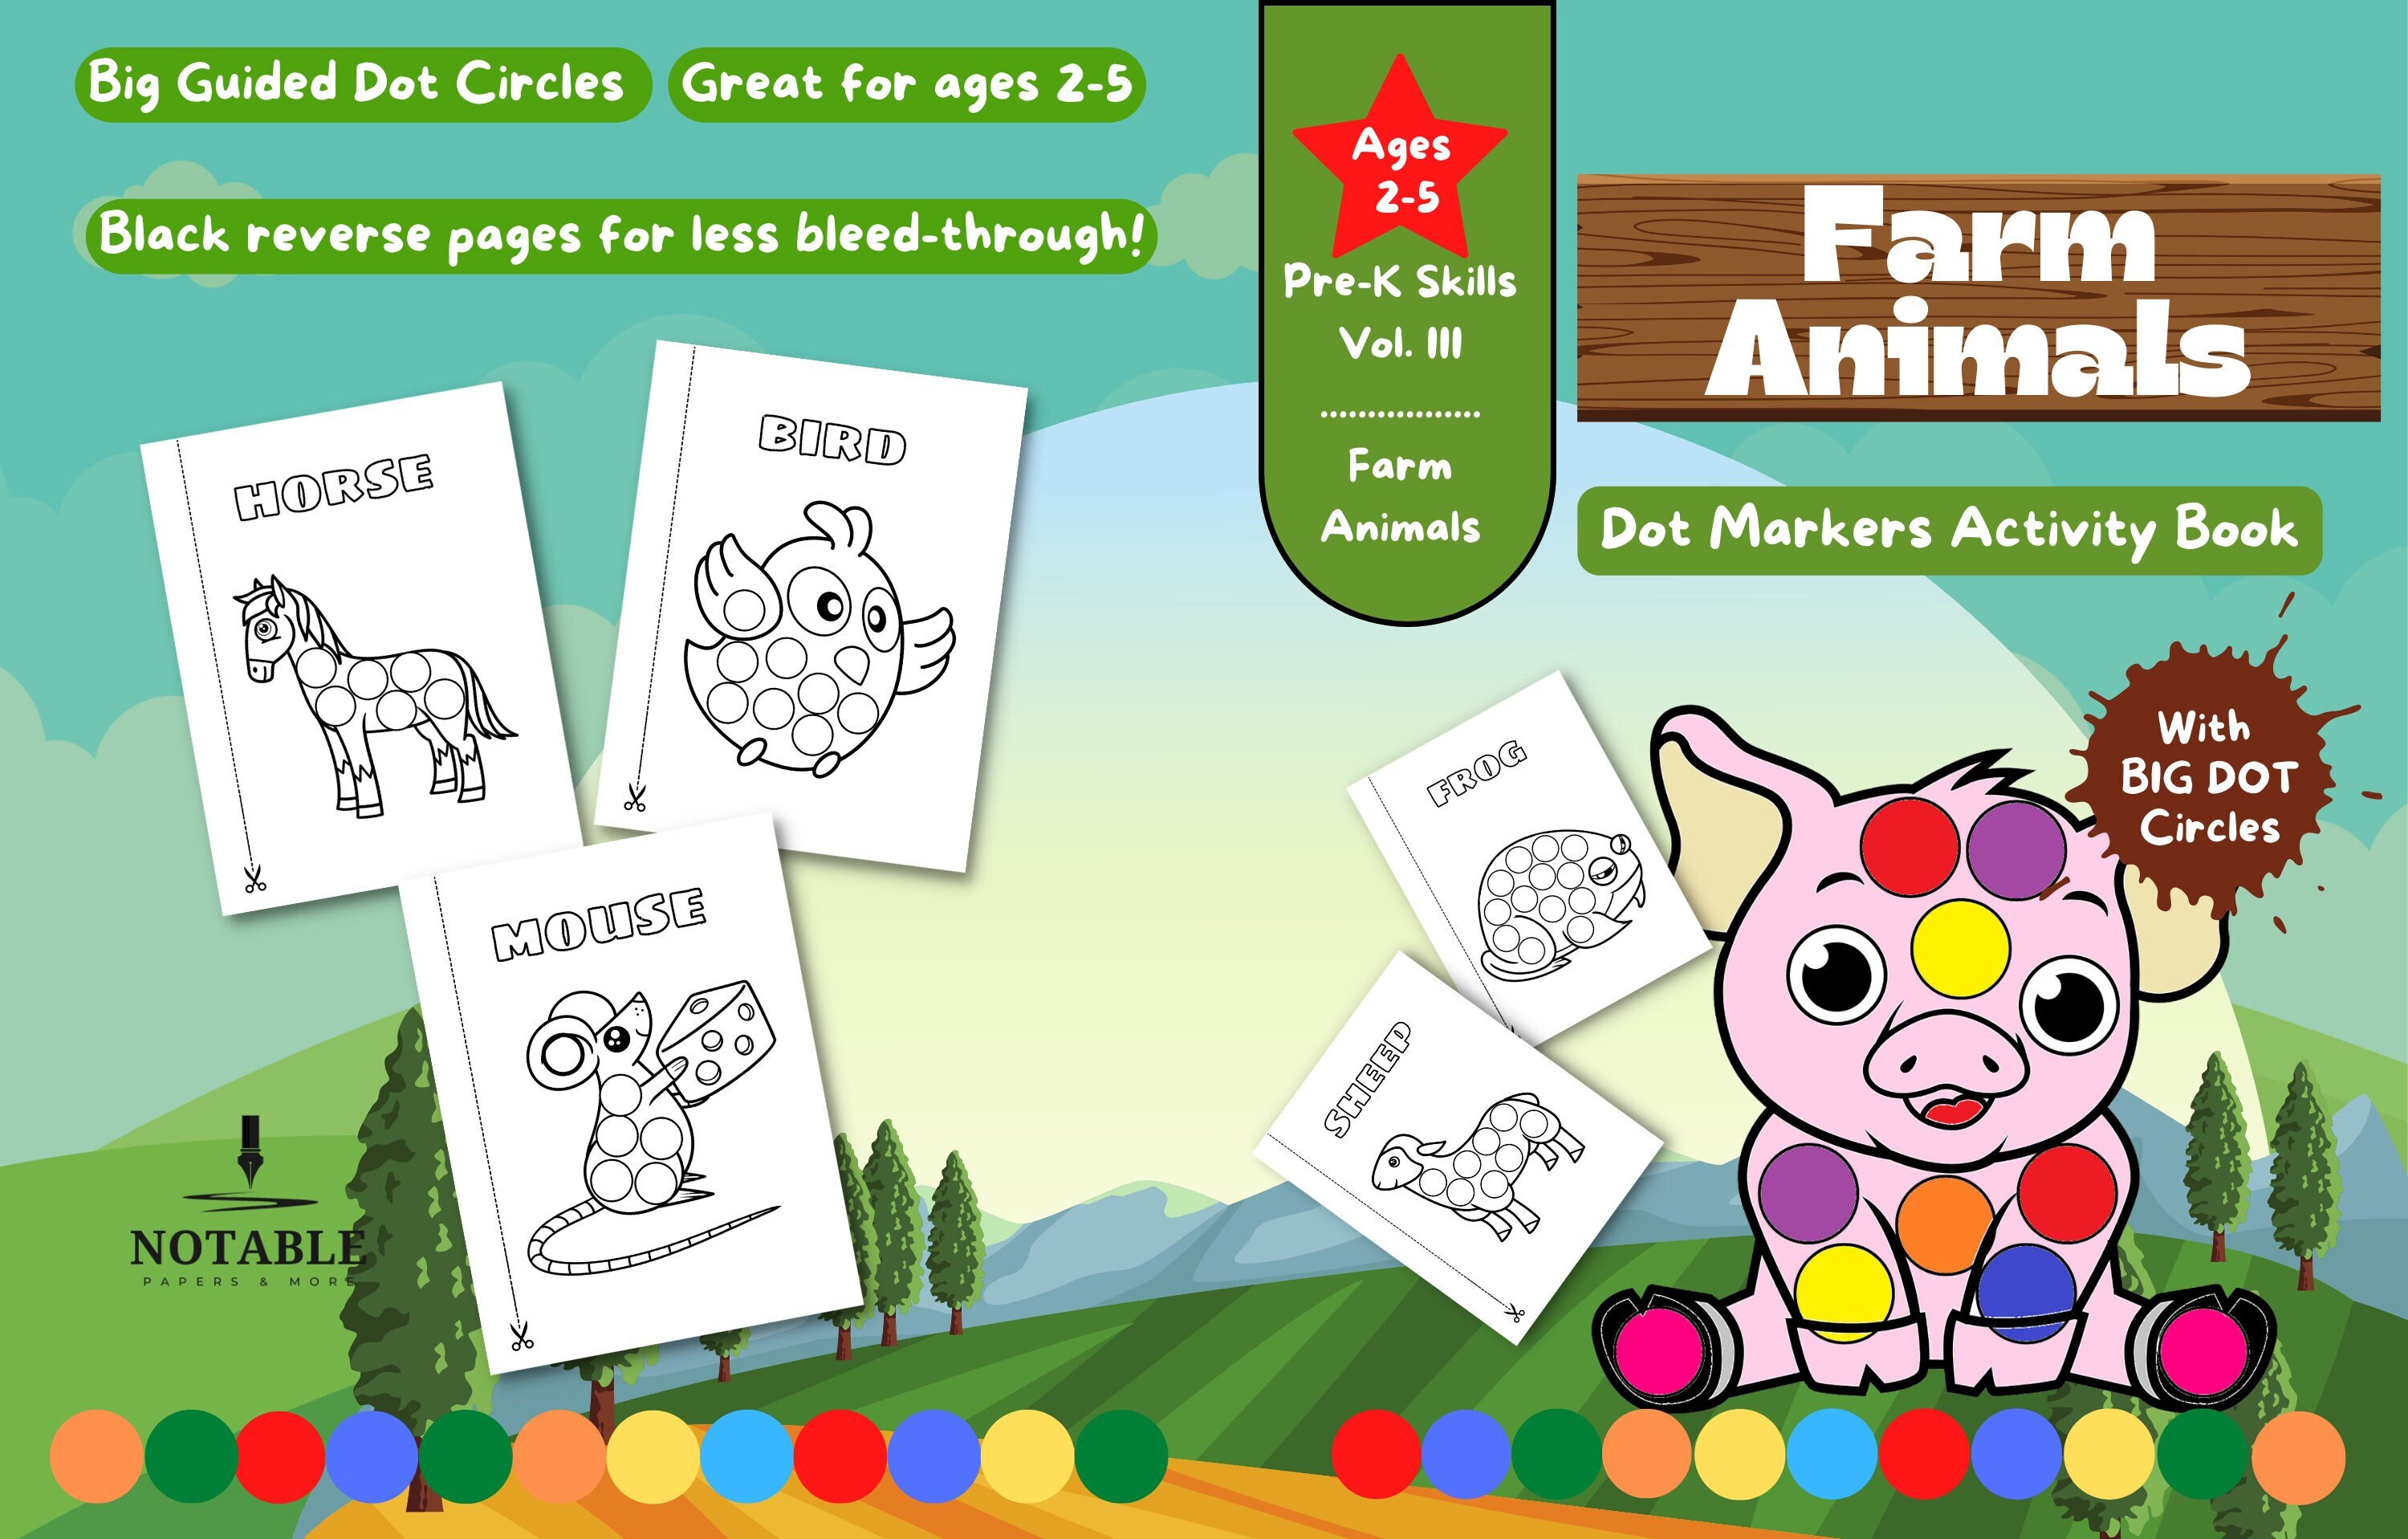 Farm Coloring Book and Activities: Farm Coloring Book for Kids Farm Animals Coloring Book and Activities for Toddlers Coloring Books for Kids Ages 3-5 ABC Learning for Toddlers Toddler Books 88 Pages 8.5x11 [Book]